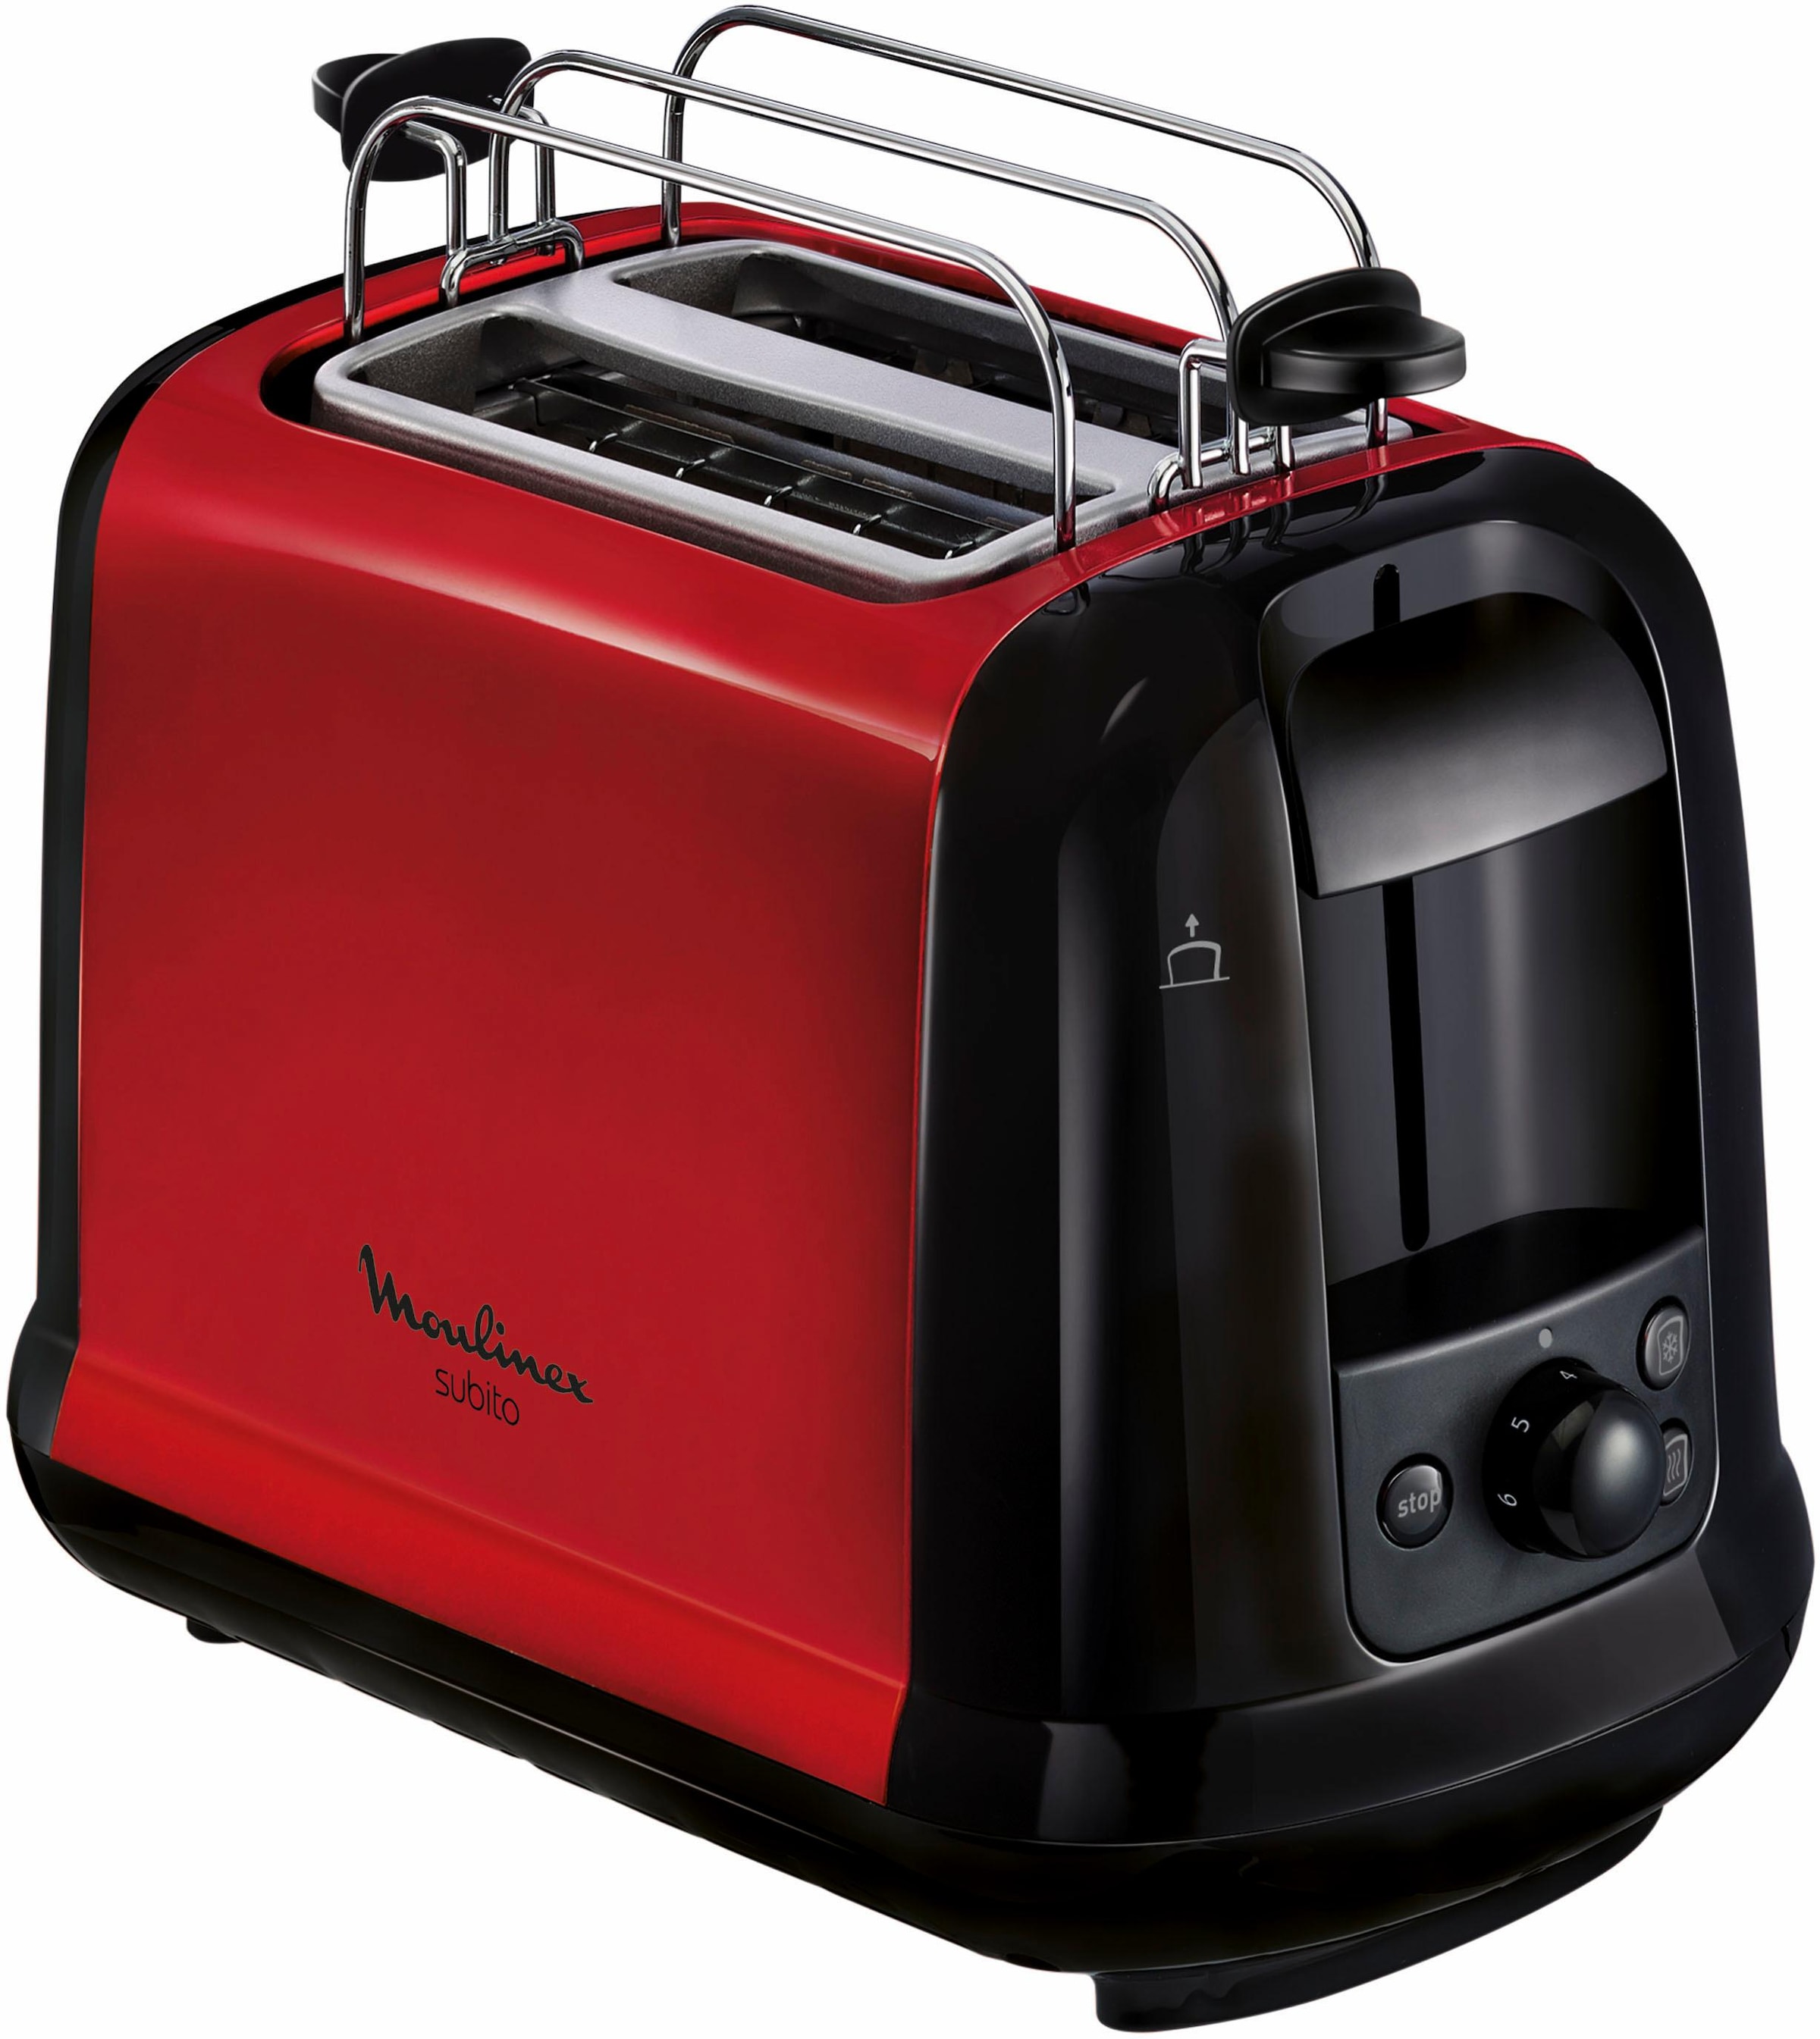 Grille-pain Colors Plus Russell Hobbs - Rouge - 26554-56